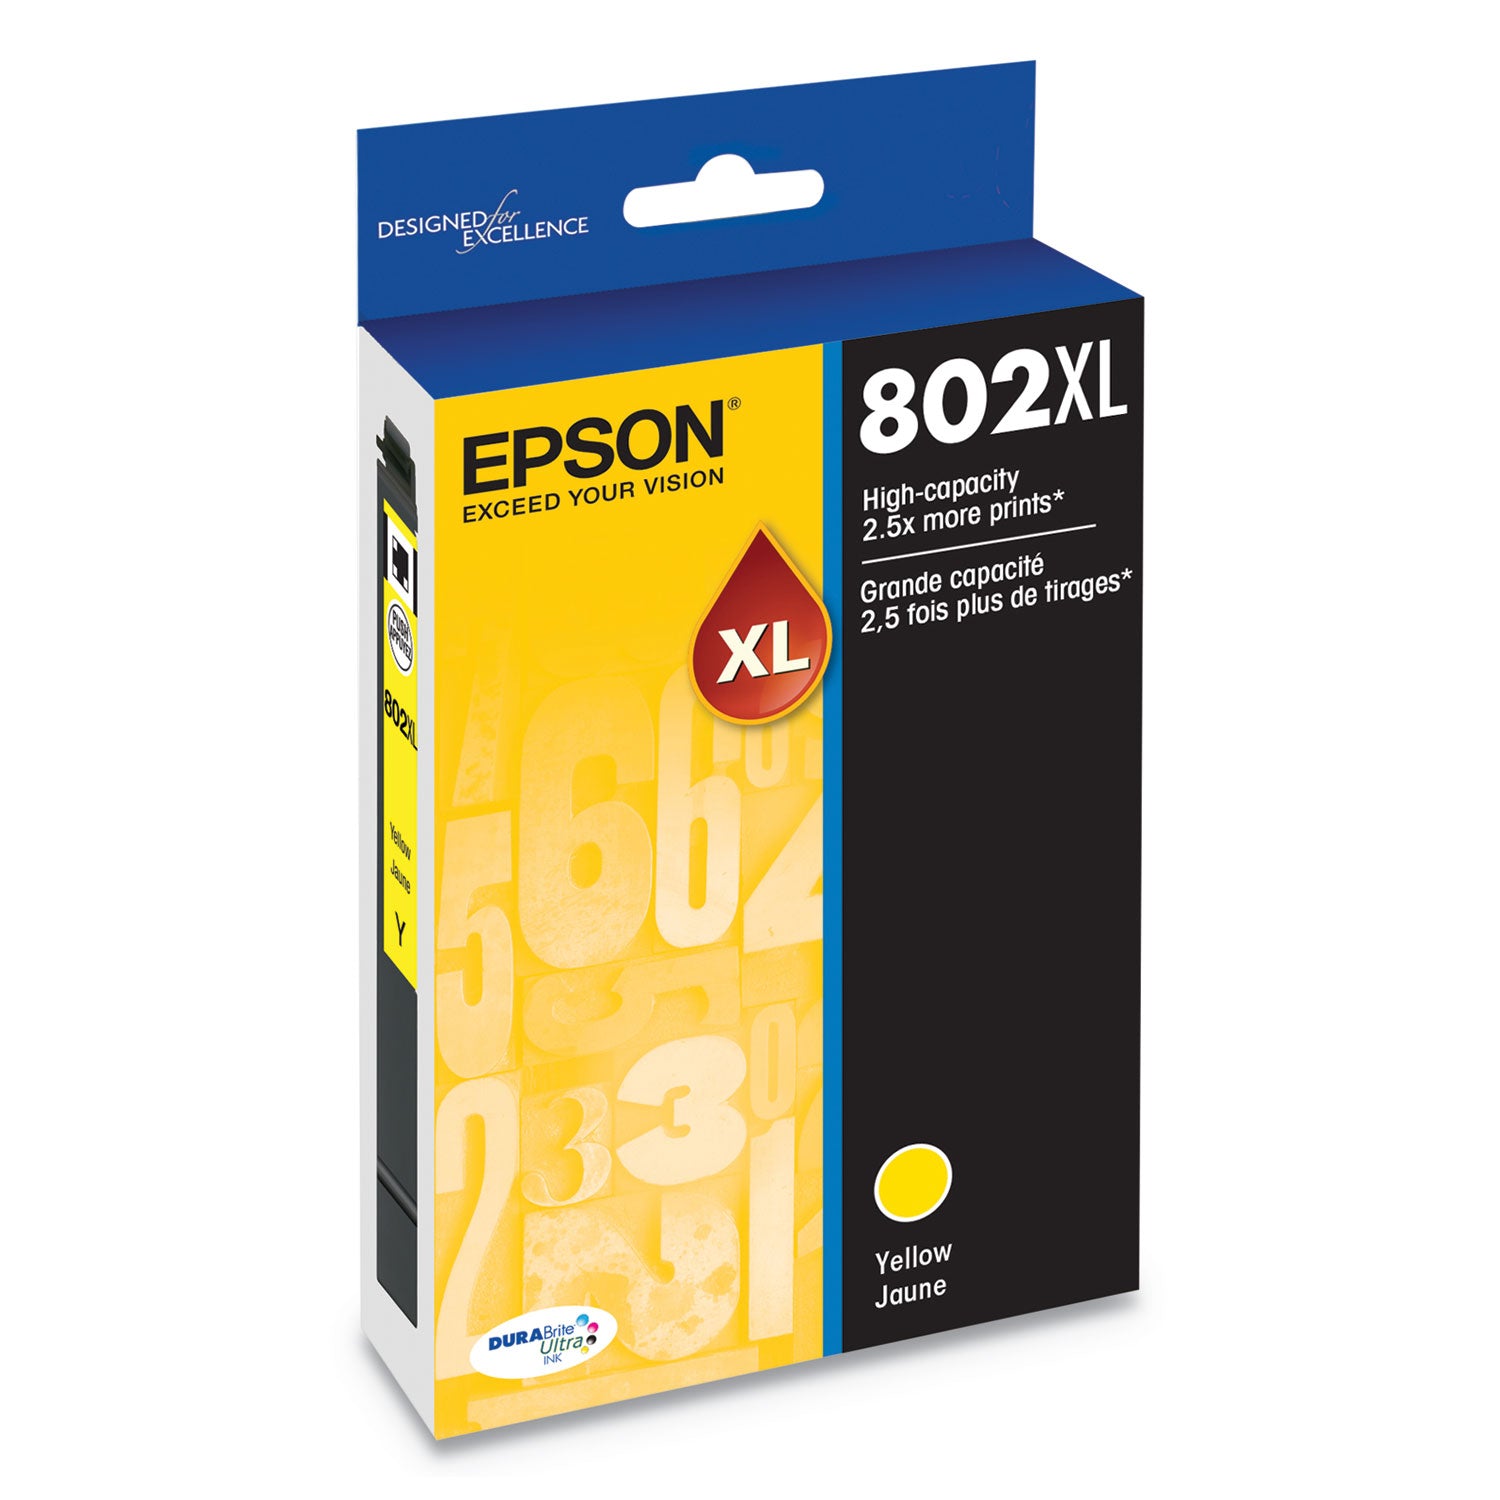 t802xl420-s-802xl-durabrite-ultra-high-yield-ink-1900-page-yield-yellow_epst802xl420s - 2